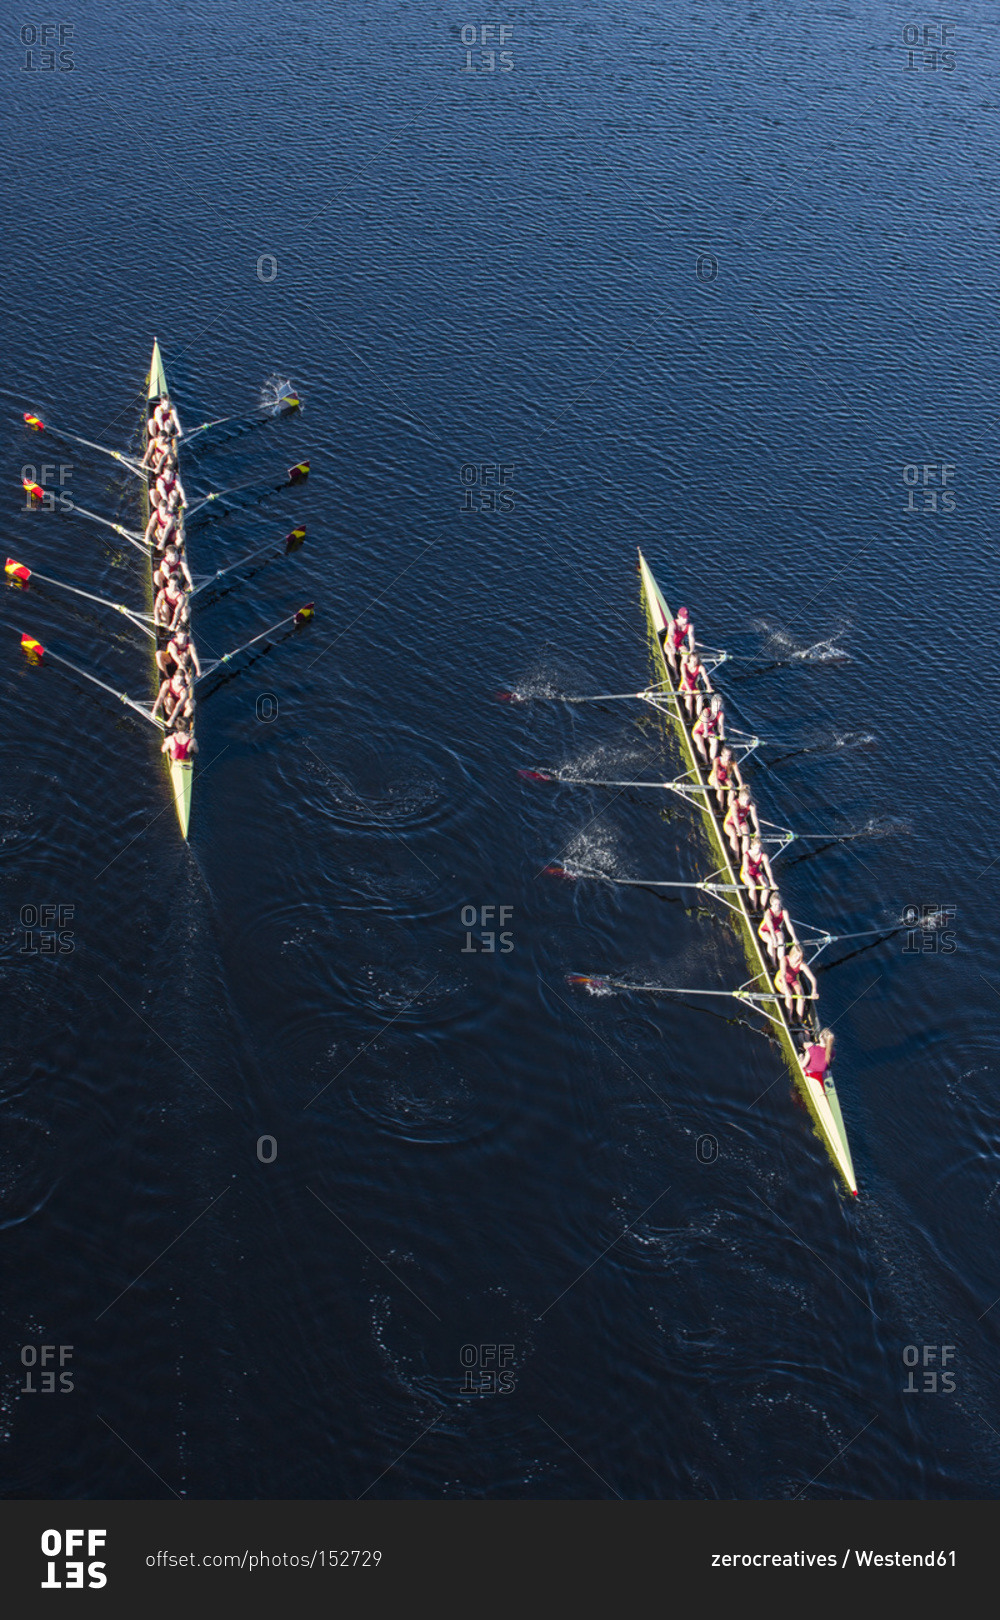 Overhead view of two rowing eights in water